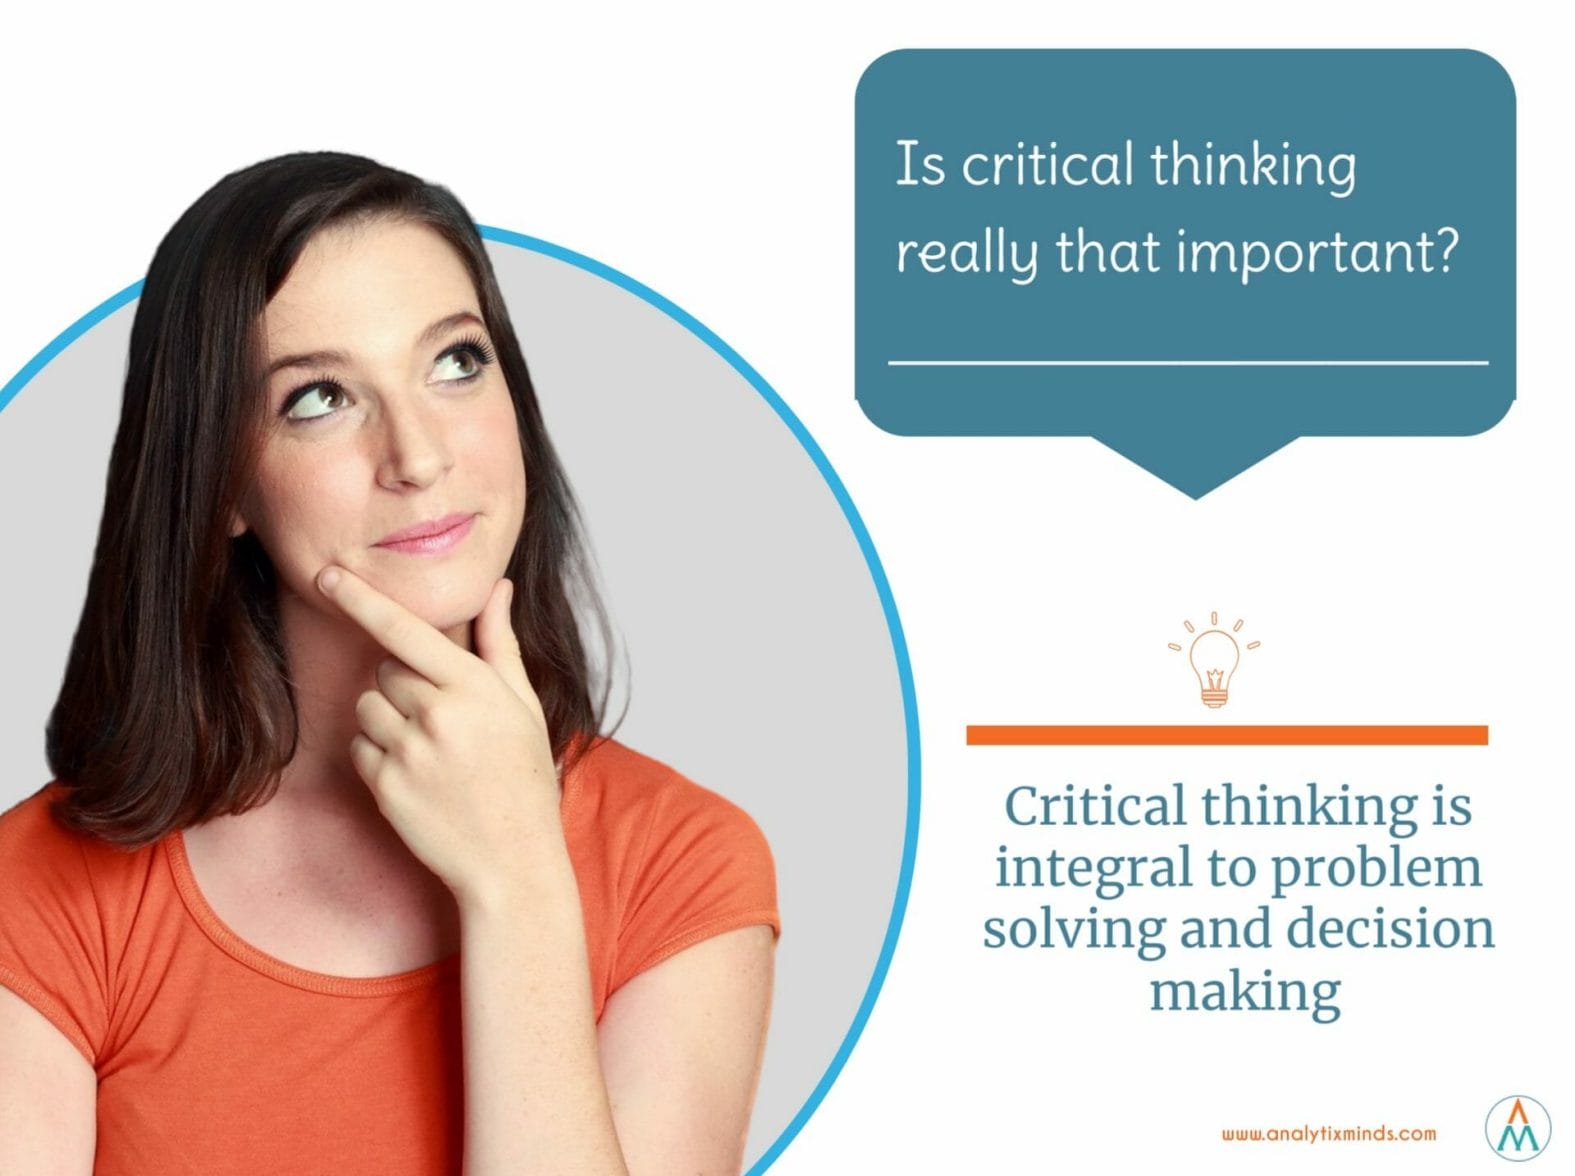 what is the most important thing about critical thinking